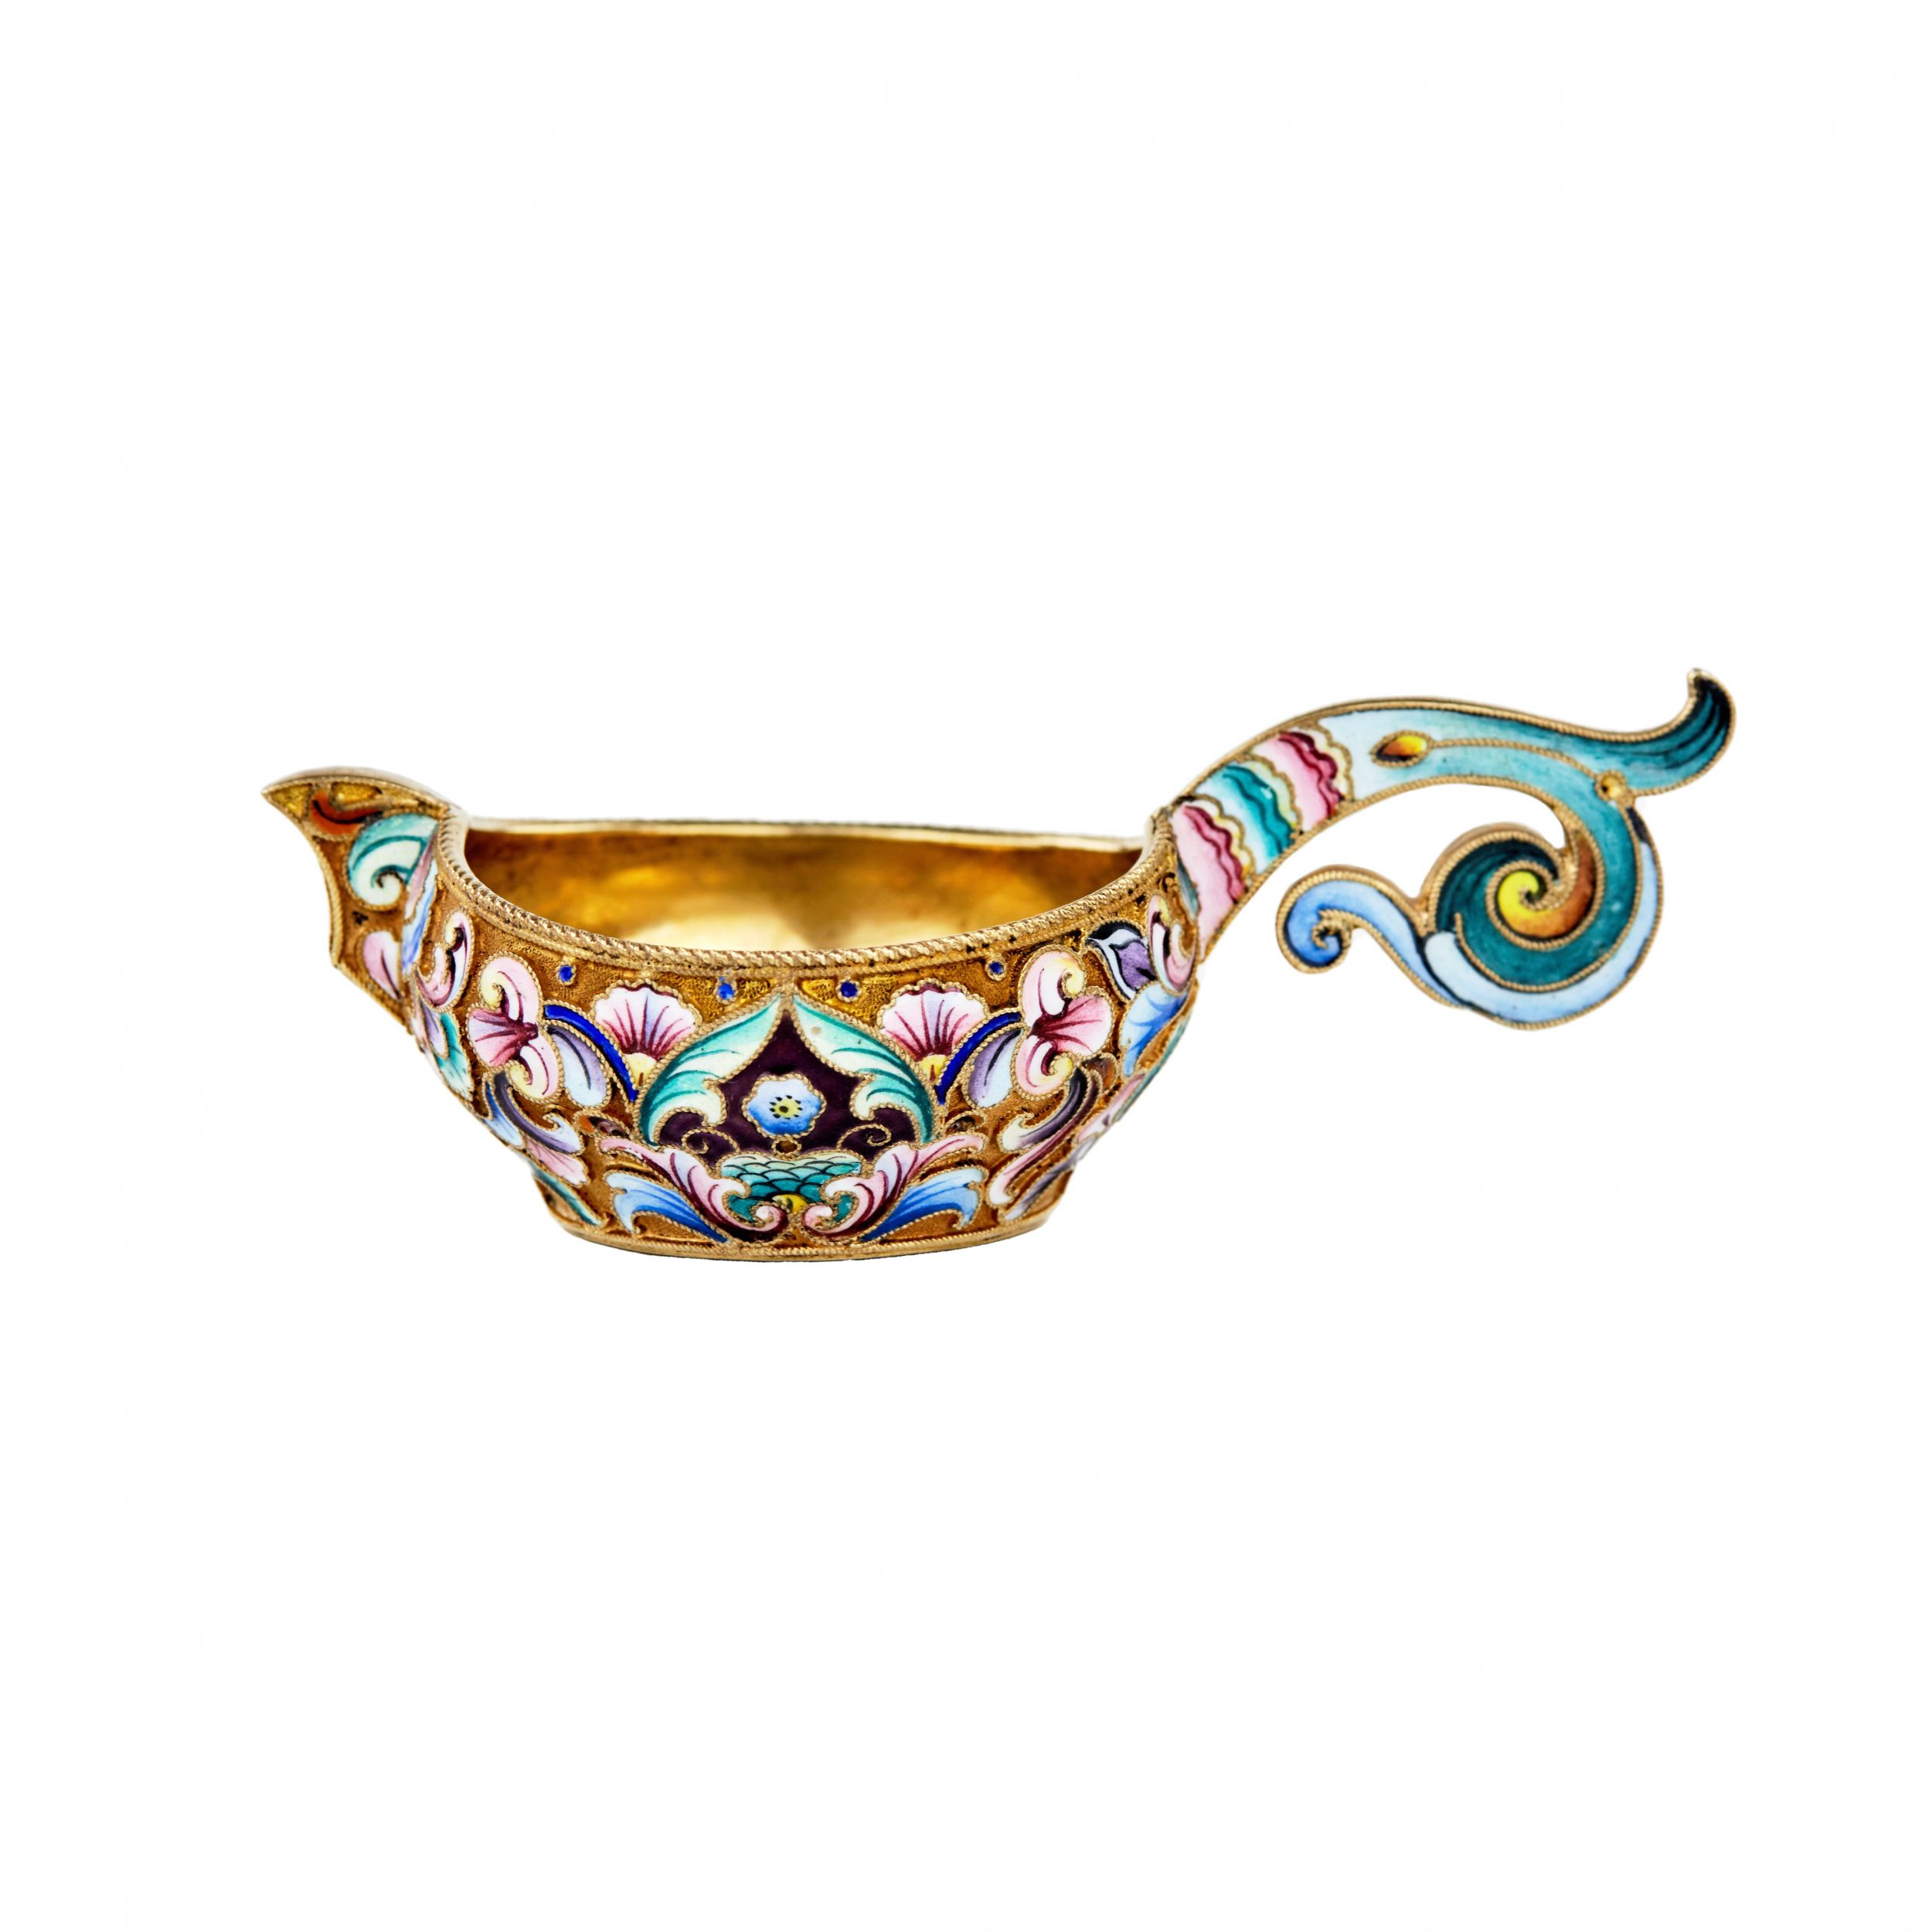 Silver-ladle-with-painted-enamels-Moscow-20th-artel-1908–1917-